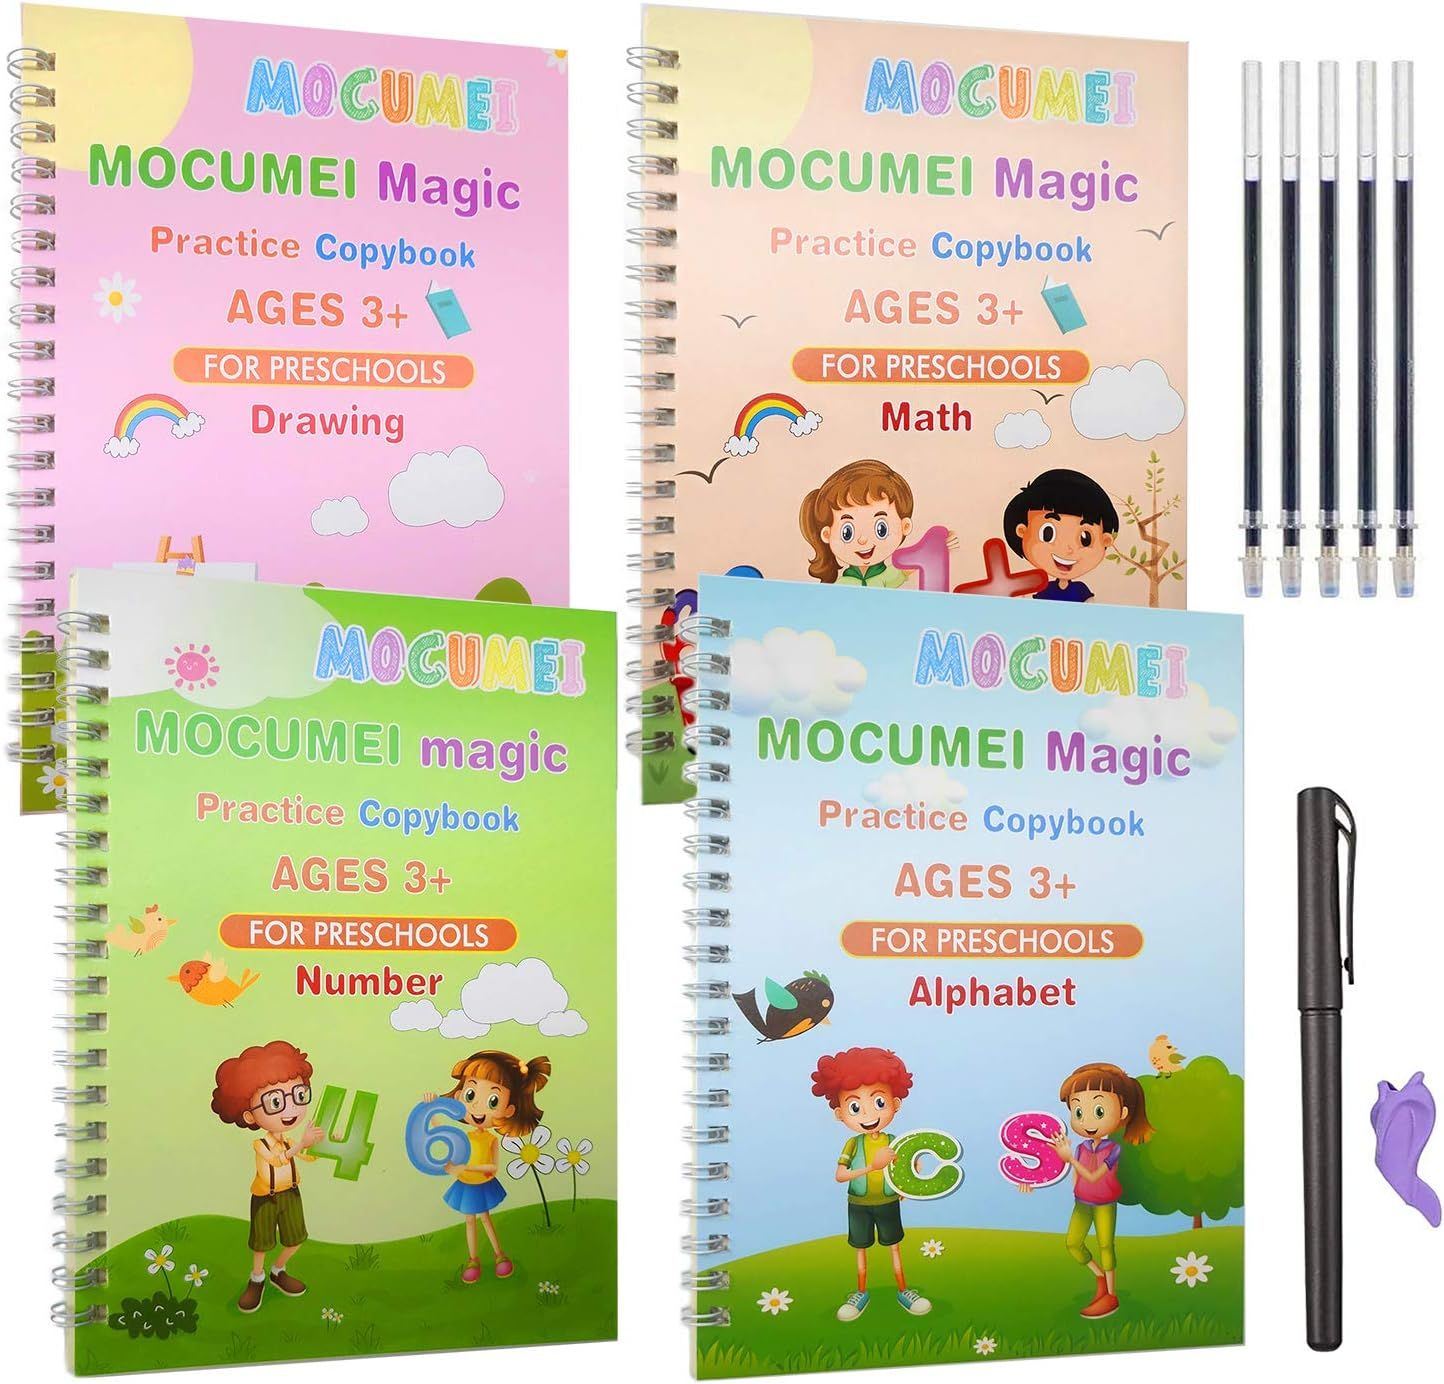 Premium Grooved Handwriting Practice for Kids, Reusable Children's Magic  Copybook with Pencil Grips and Pouch, Large Size Calligraphy Workbooks Kit